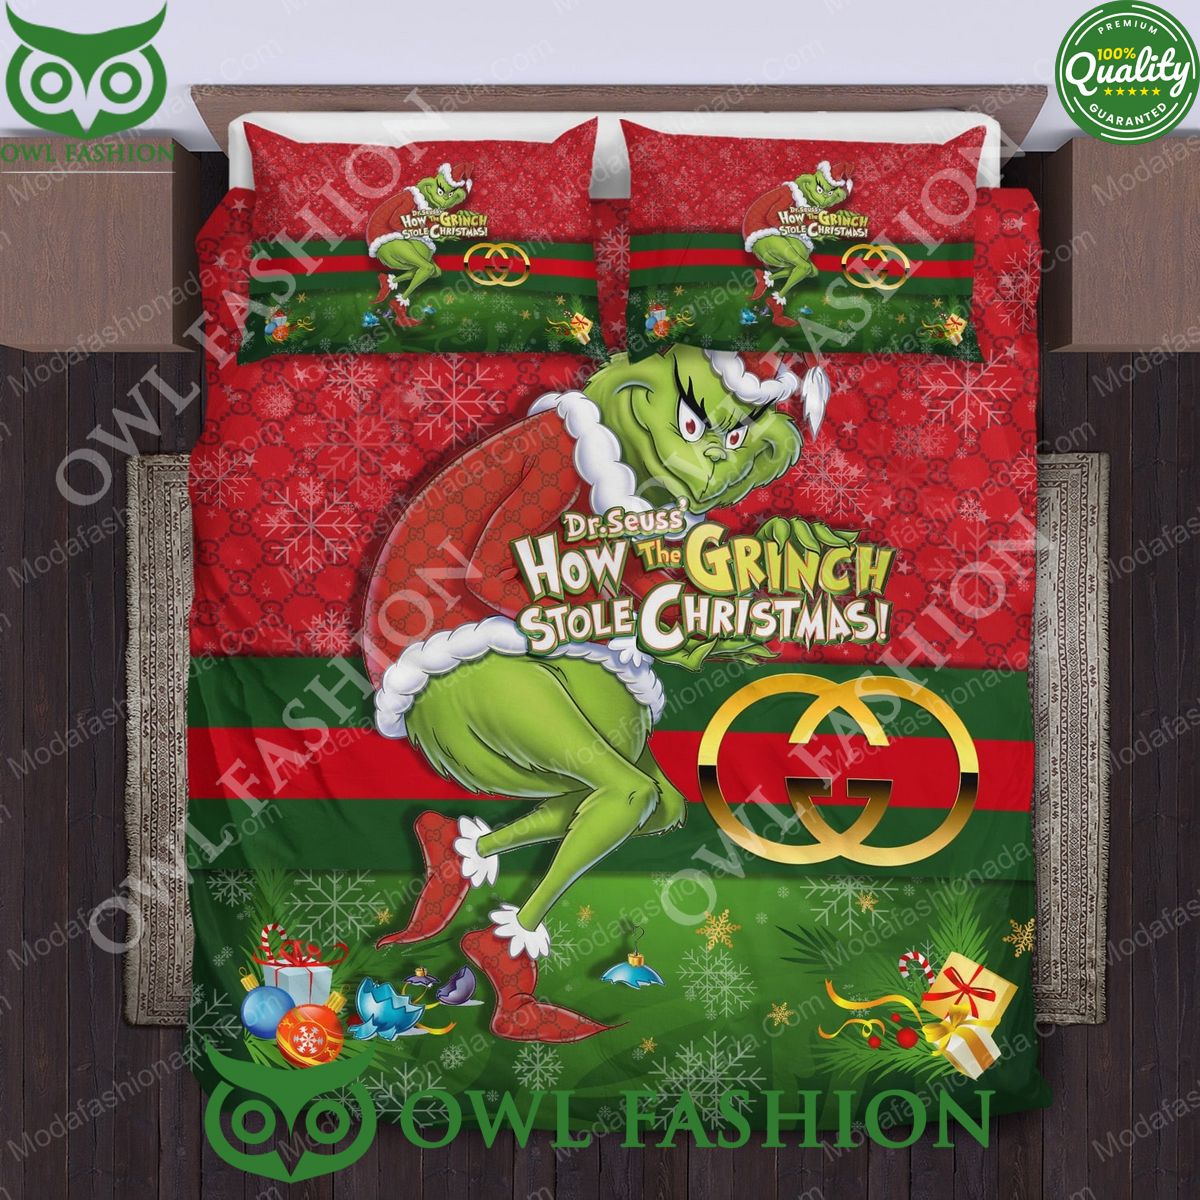 how the grinch stole christmas bedding sets 1 UxfvK.jpg